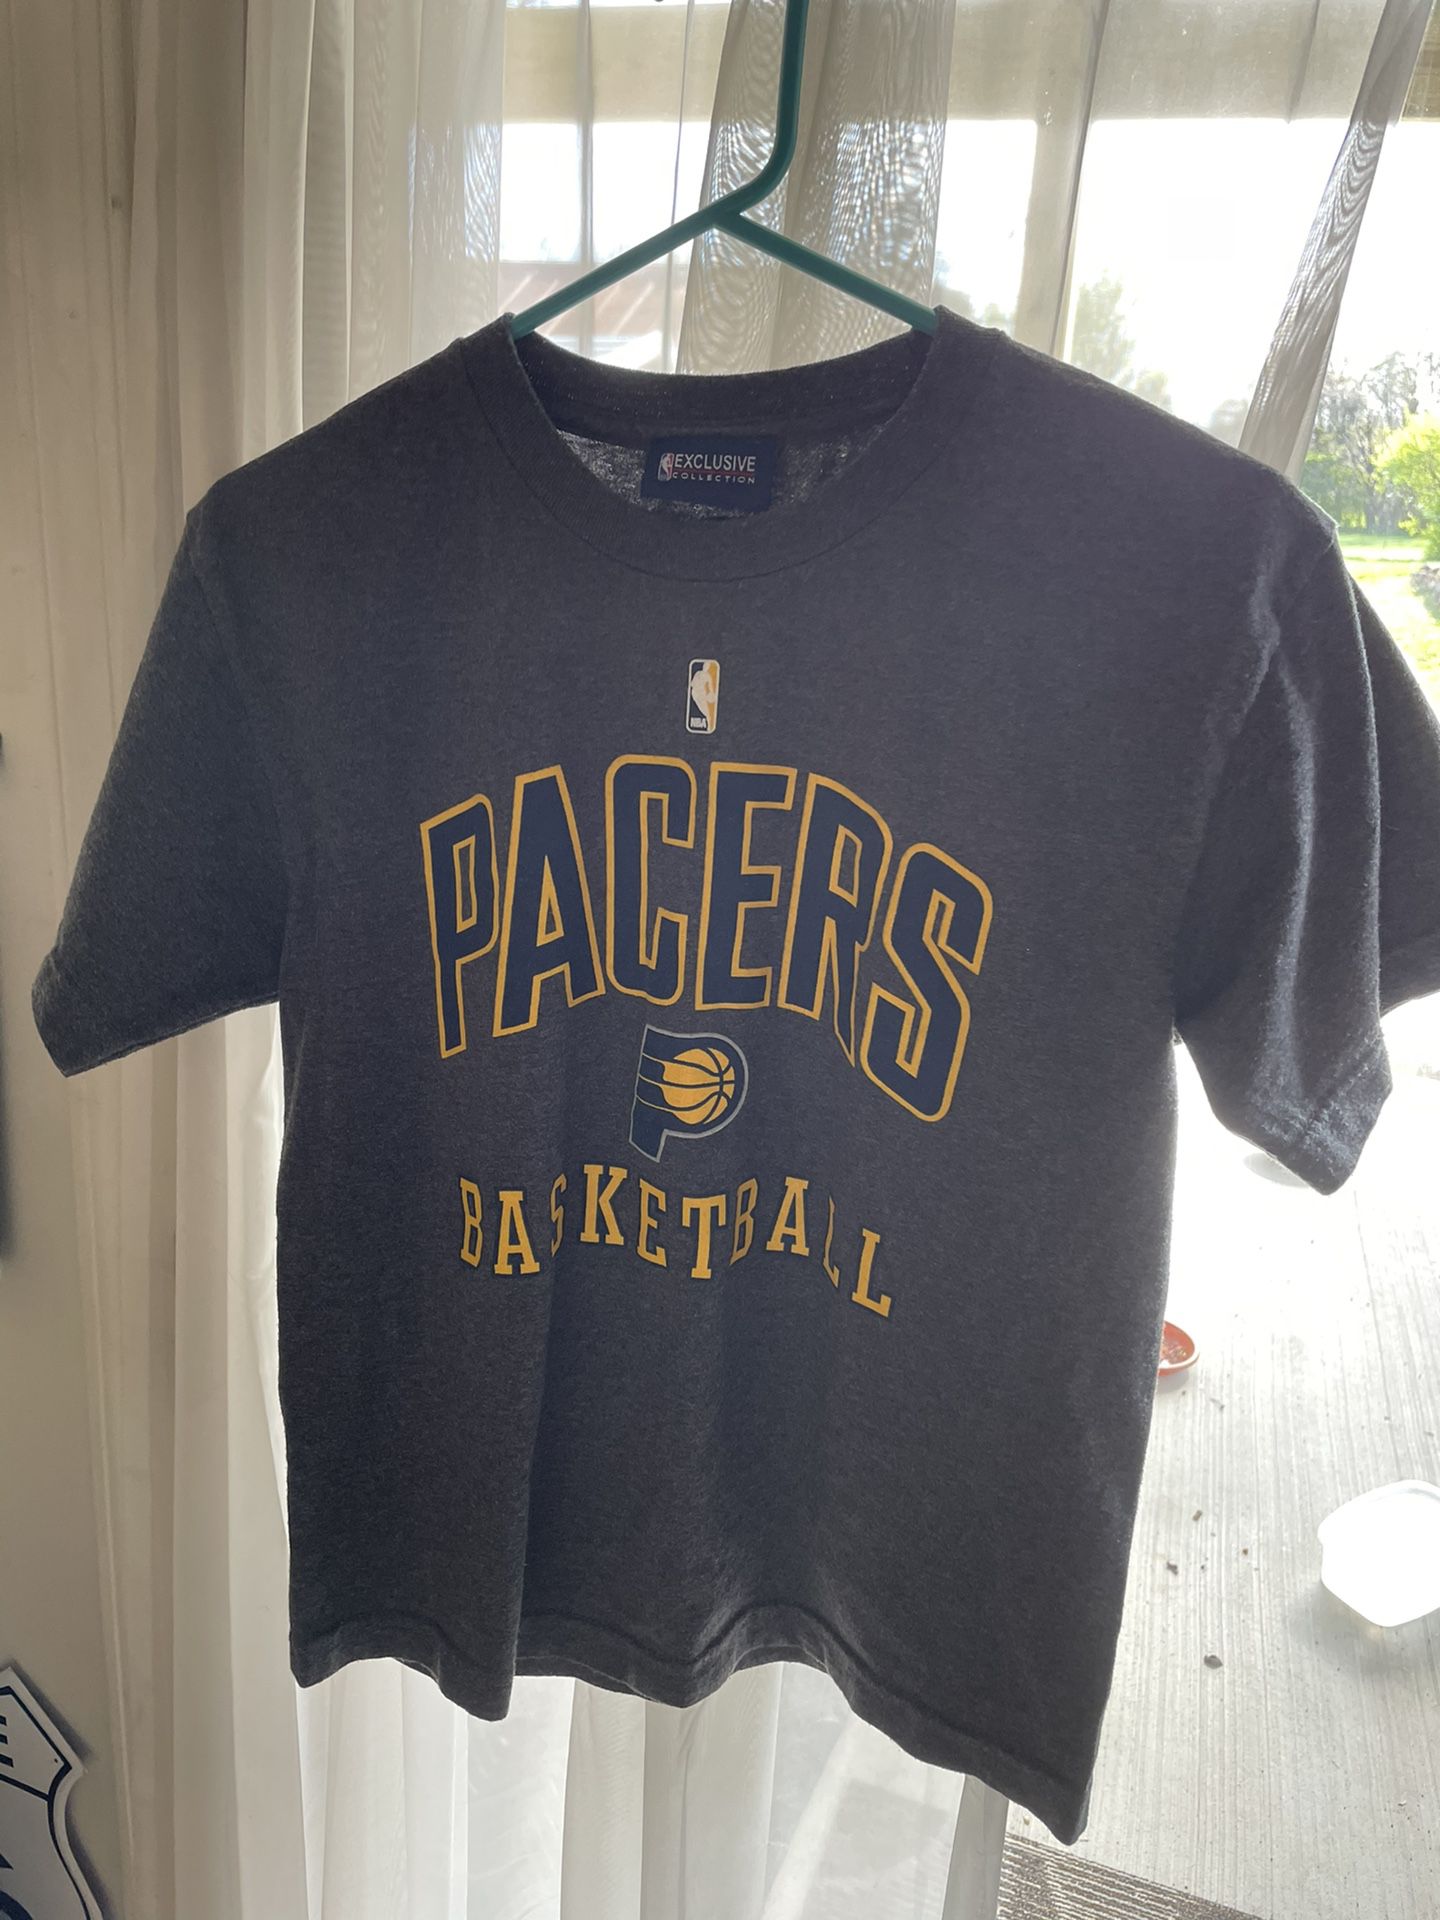 NBA Indiana Pacers Basketball 🏀 Tee. Youth - L Nice